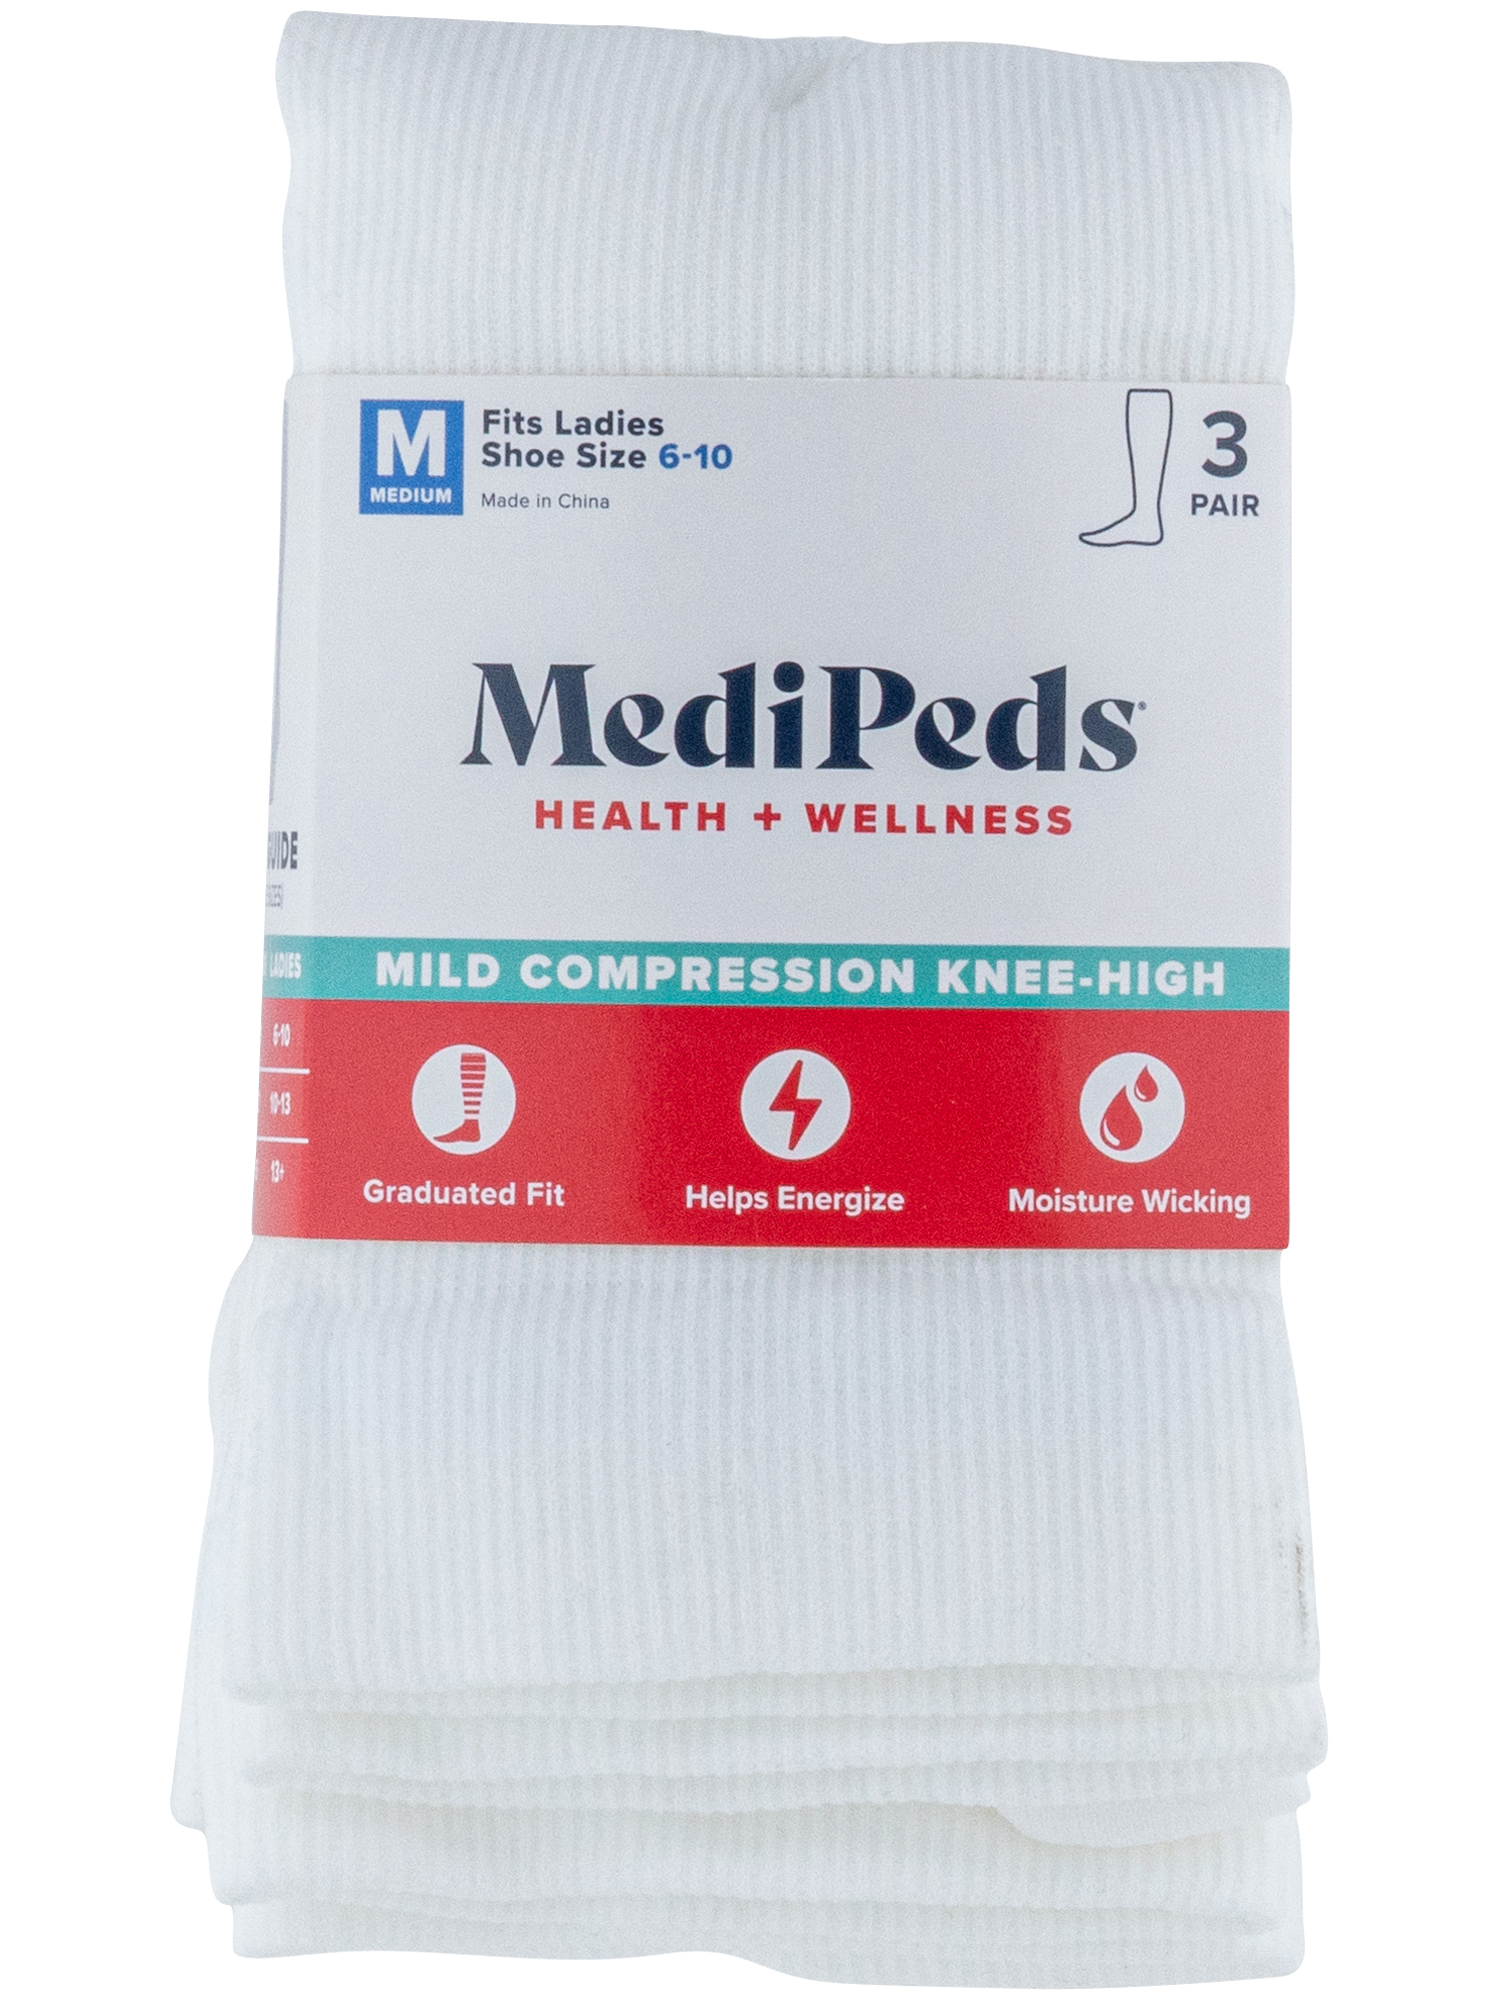 Medipeds Womens Over the Calf Support Socks, 3 Pairs - Walmart.com